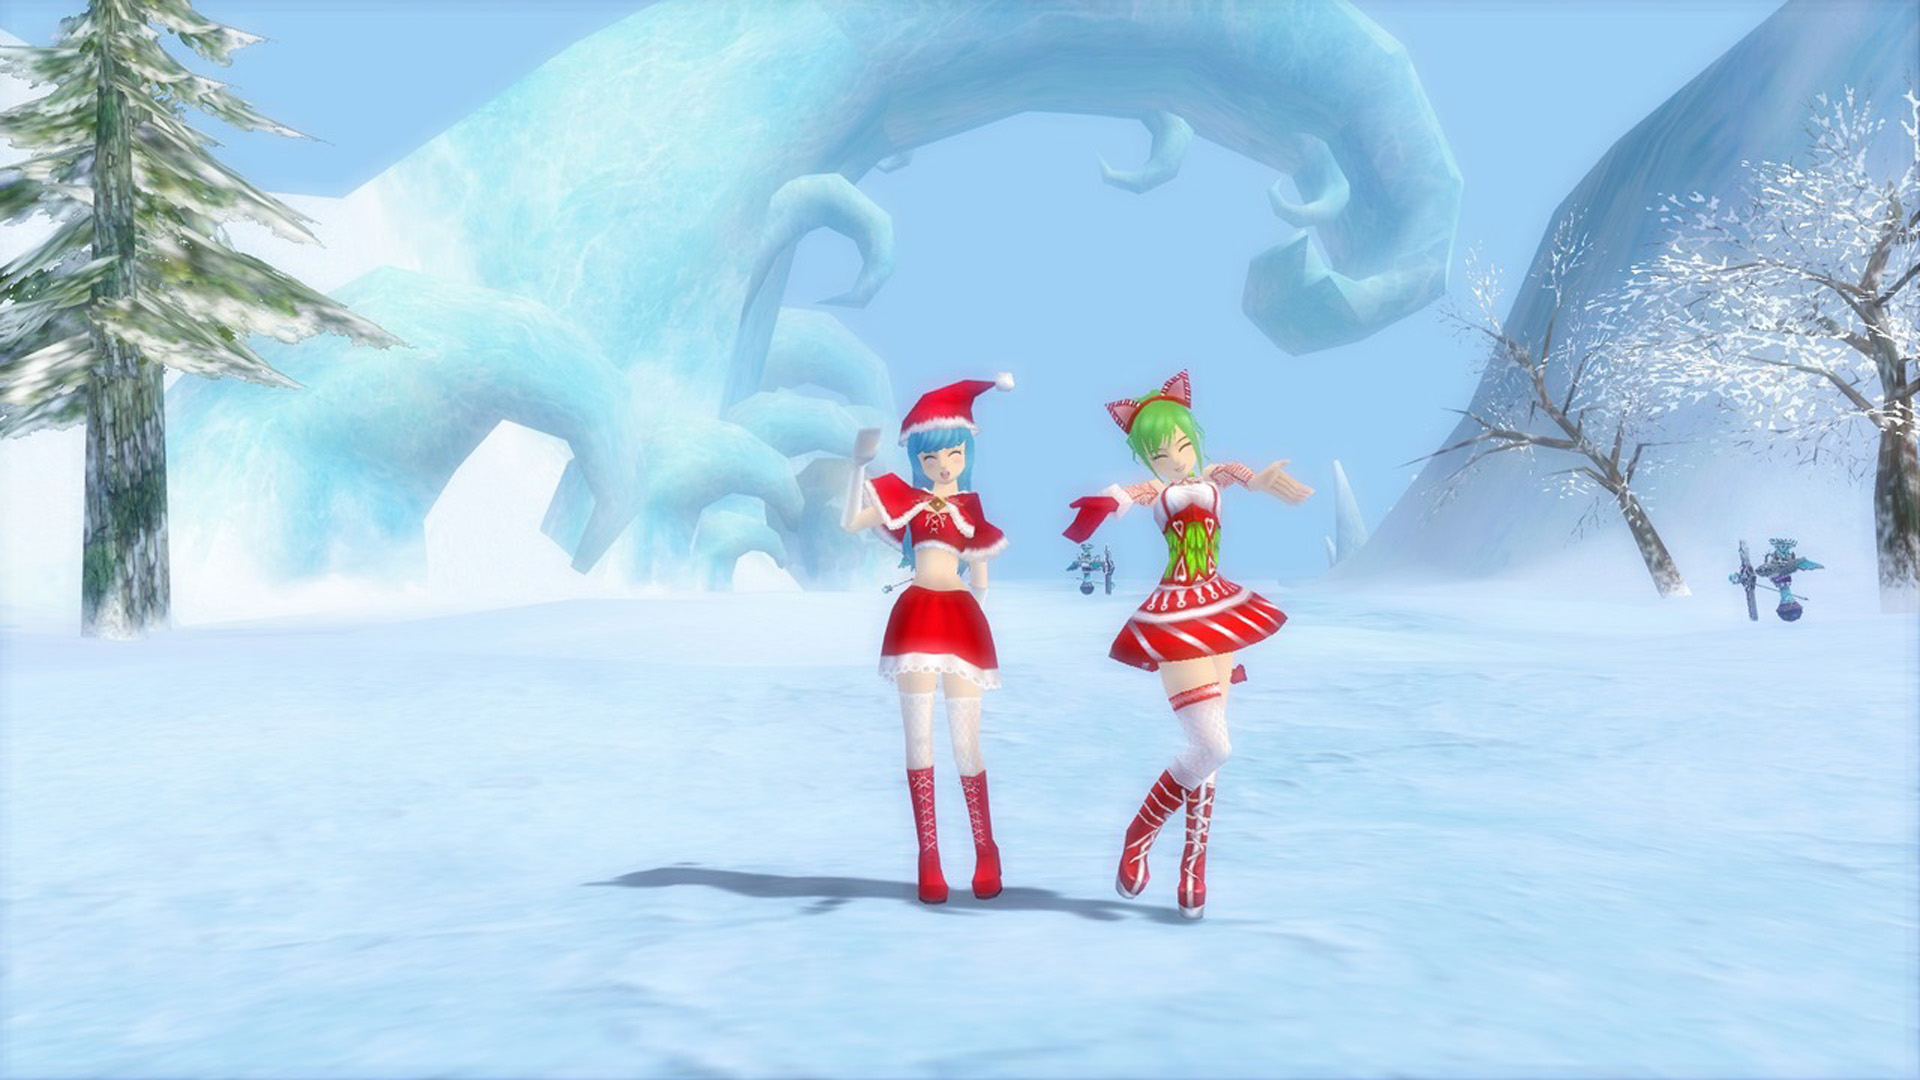 Lucent Heart Appid 283060 Steamdb Images, Photos, Reviews